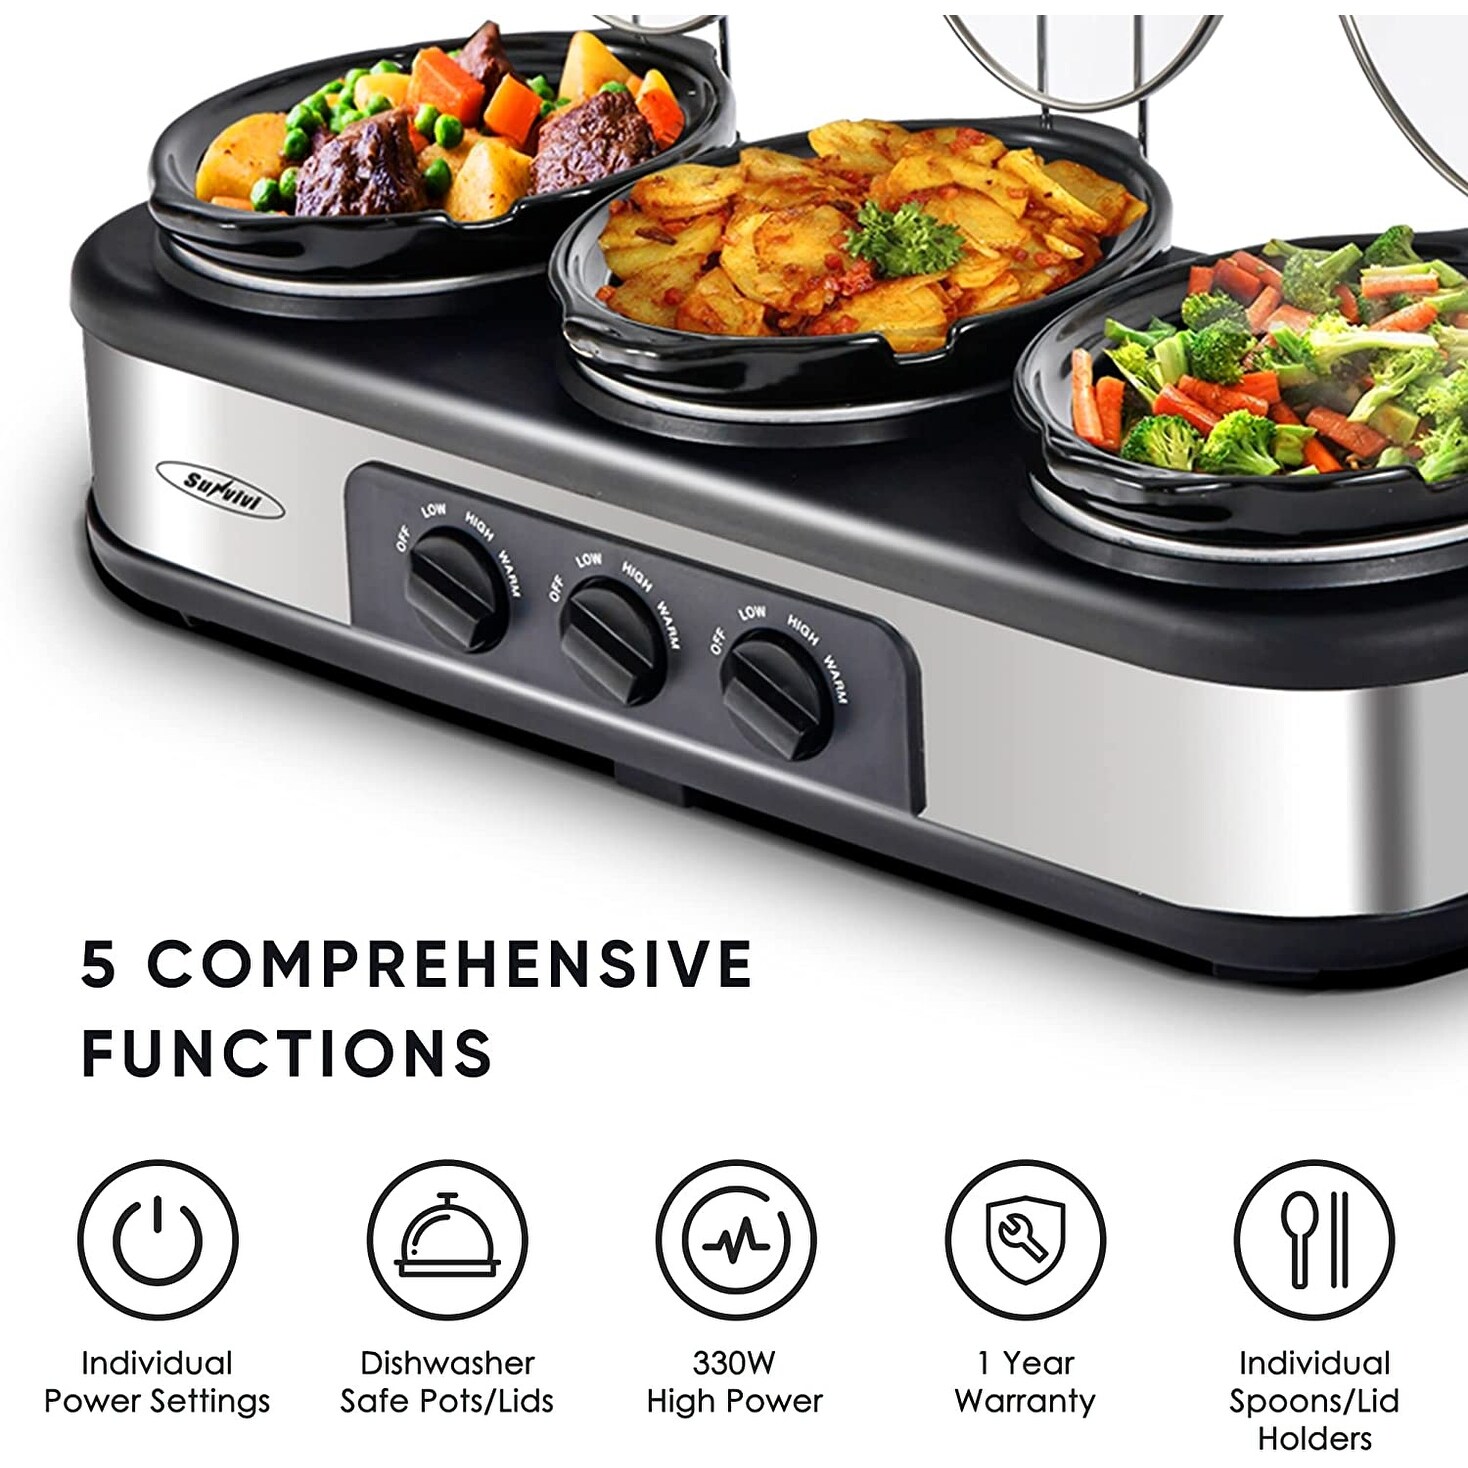 Triple Slow Cooker & Food Warmer Review 